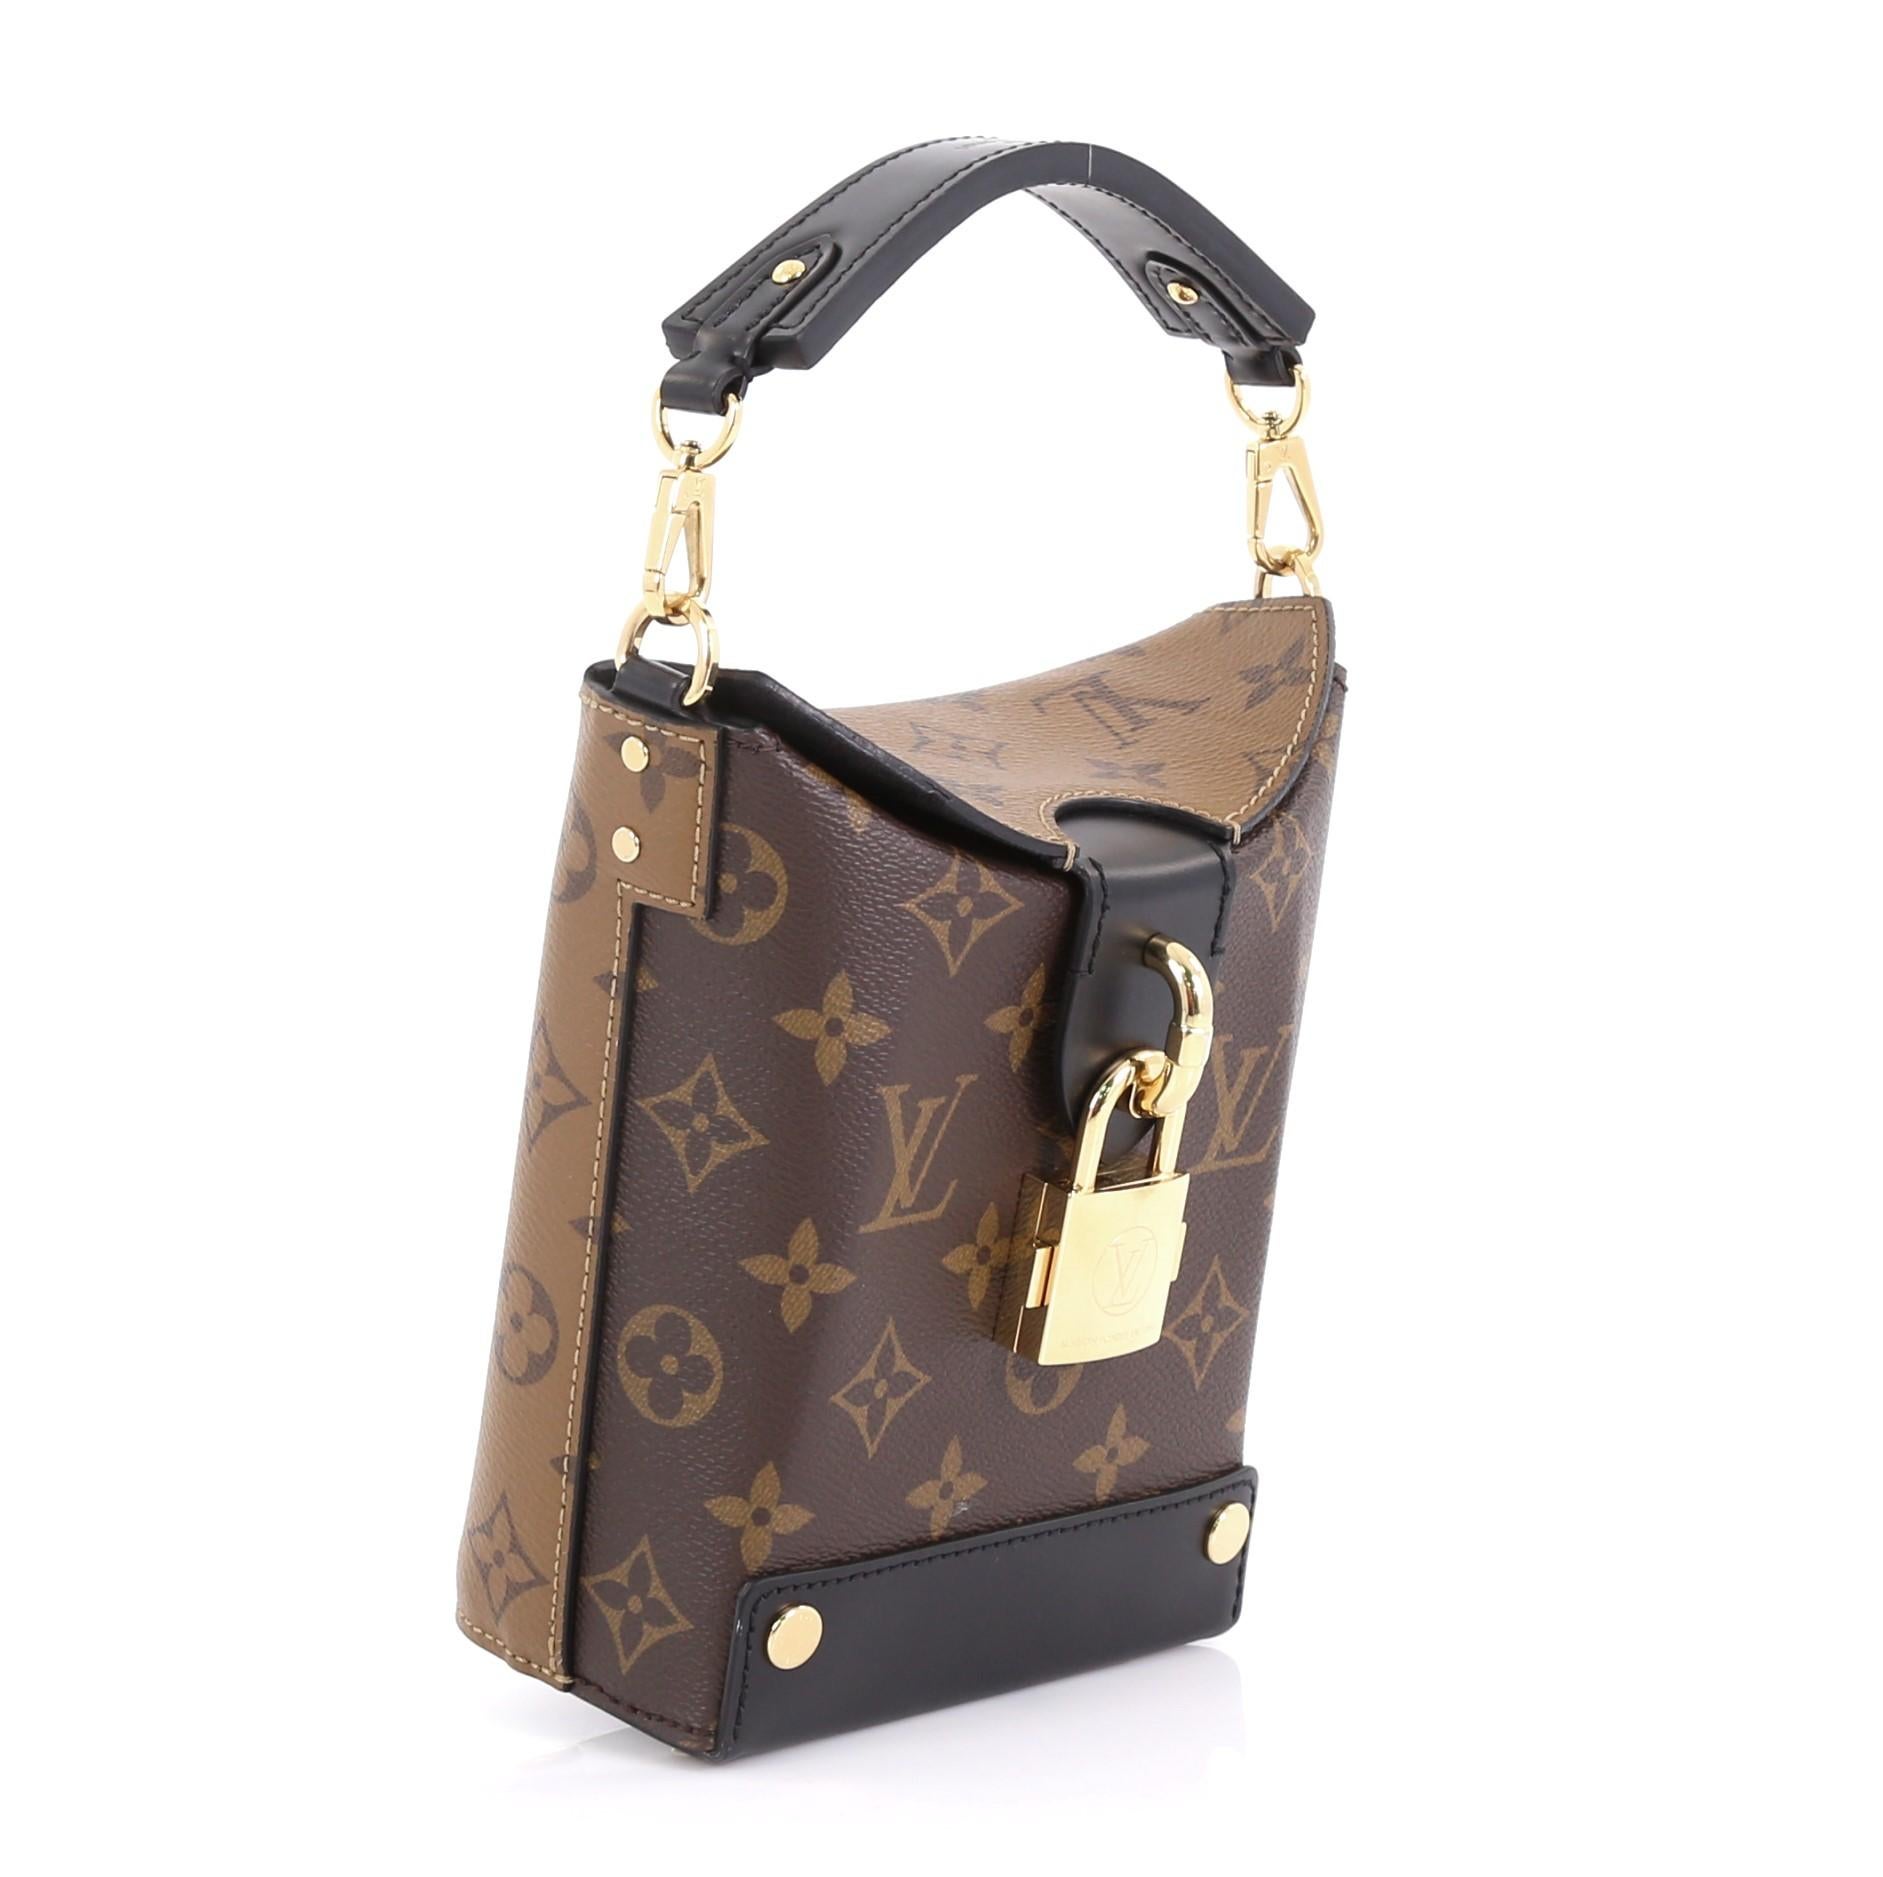 This Louis Vuitton Bento Box Handbag Reverse Monogram Canvas, crafted in brown monogram coated canvas on one side and reverse monogrammed coated canvas on the other, features a leather top handle, unique press padlock closure and gold-tone hardware.